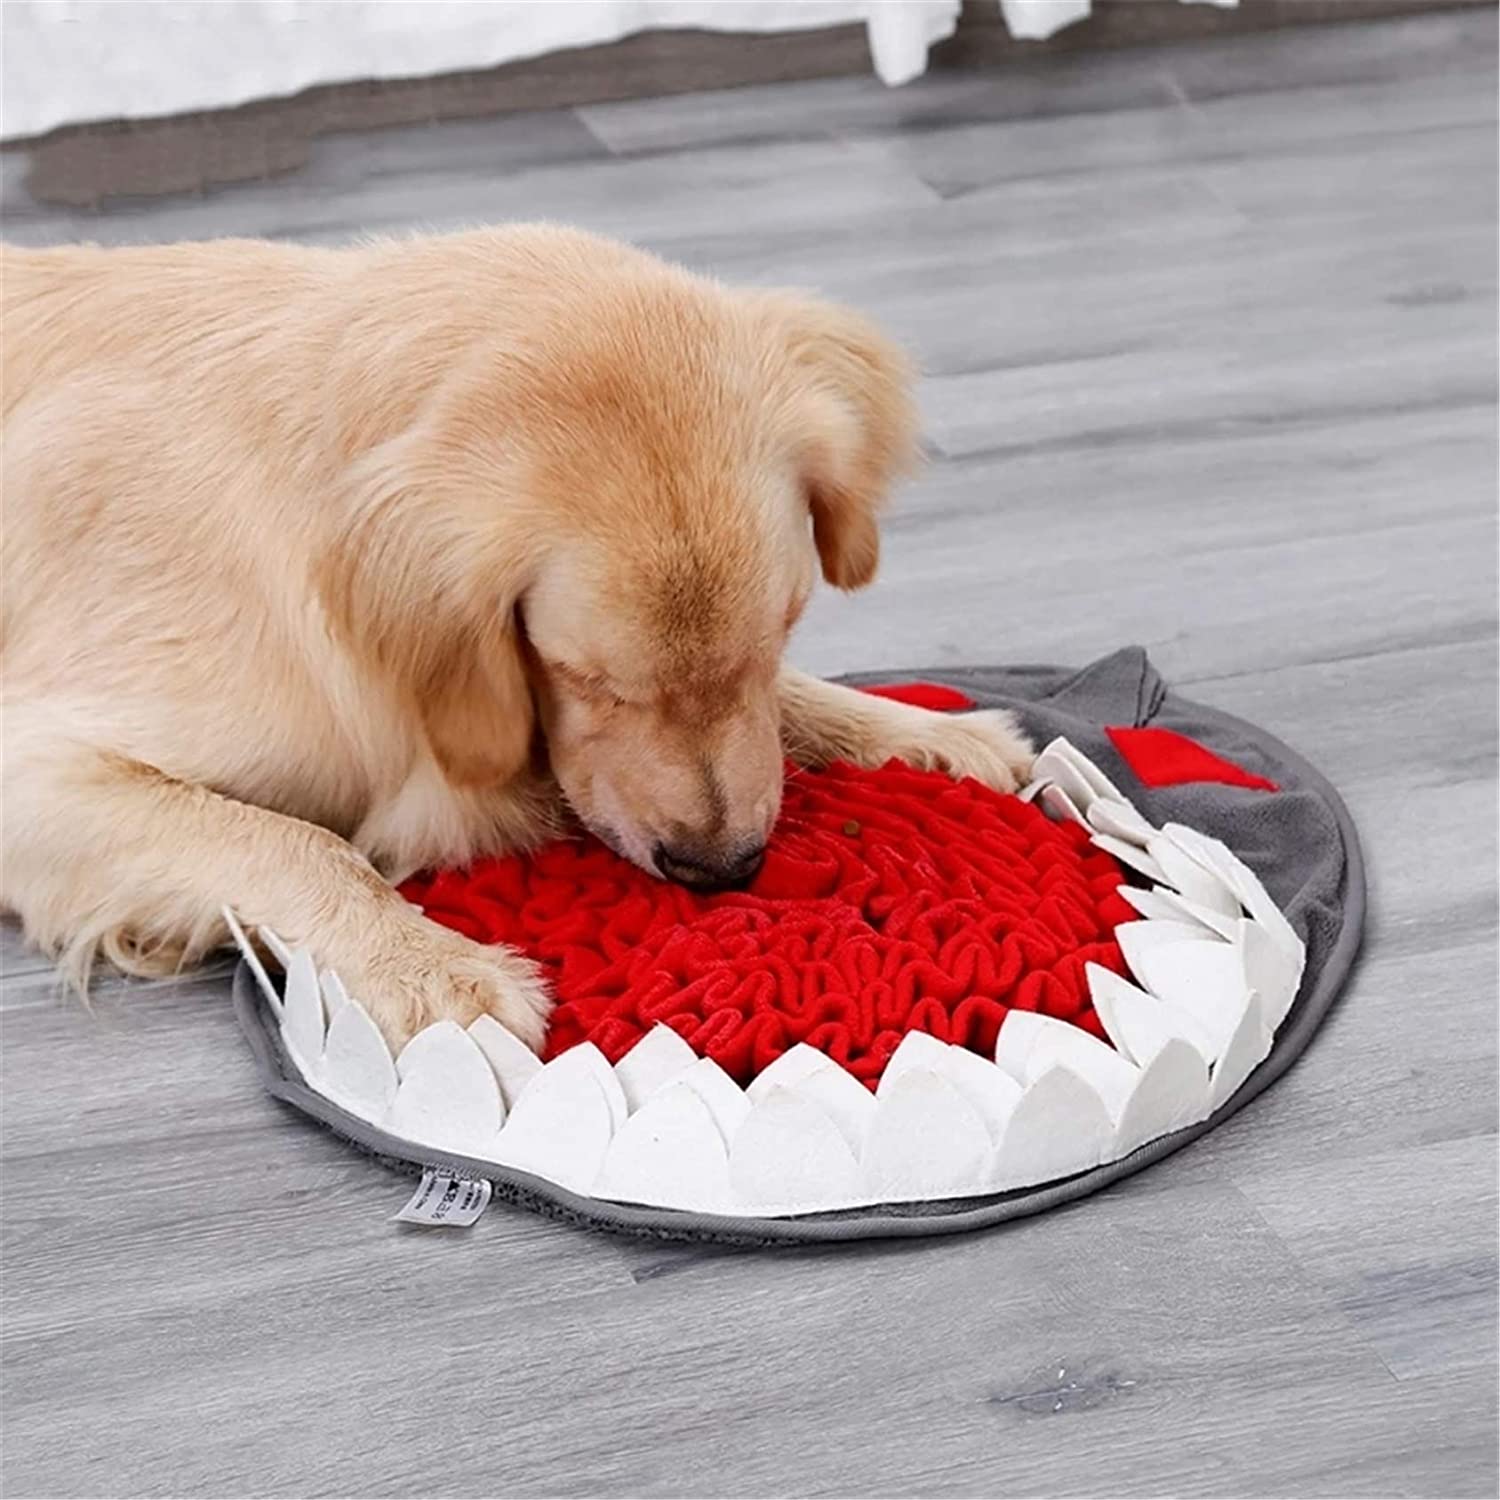 Dog Sniffing Mat, Dog Feeding Mat, Interactive Game For Boredom, Puzzle Toys  To Encourage Natural Food Foraging Skills (27 X 27)